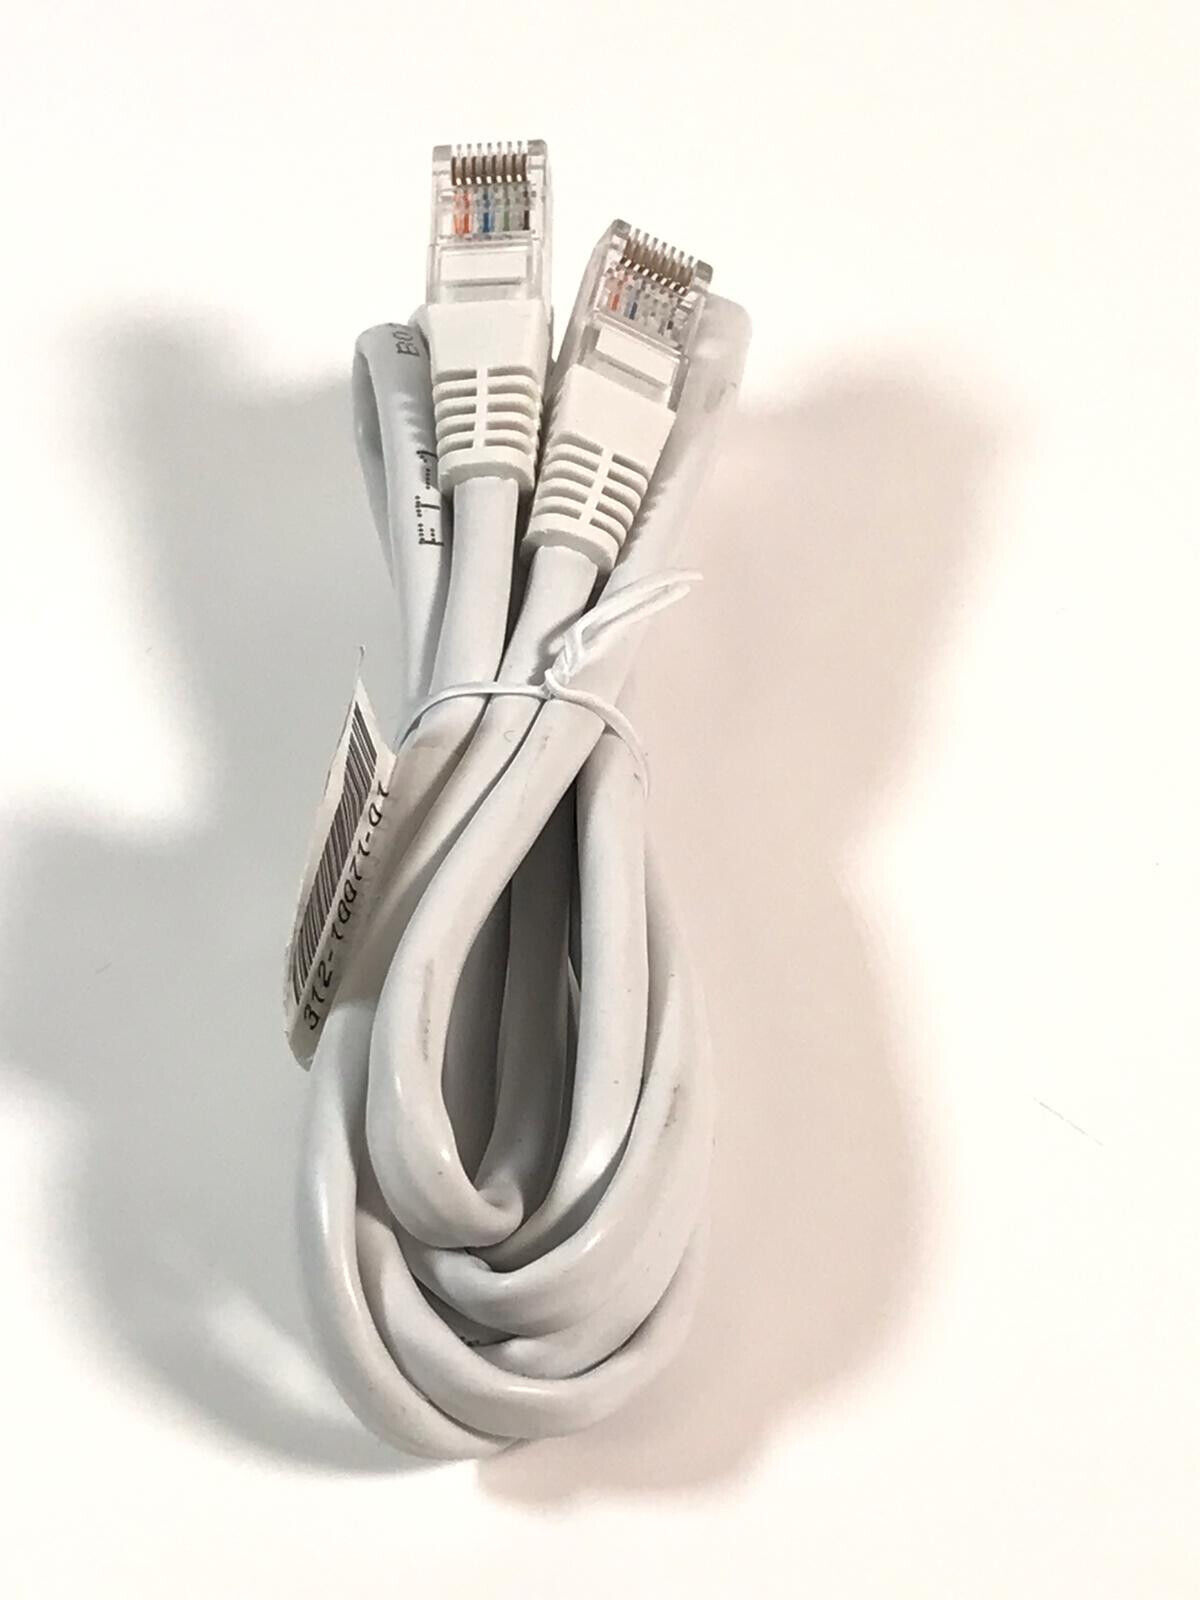 Primary image for Cat5e Patchkabel, Weiß